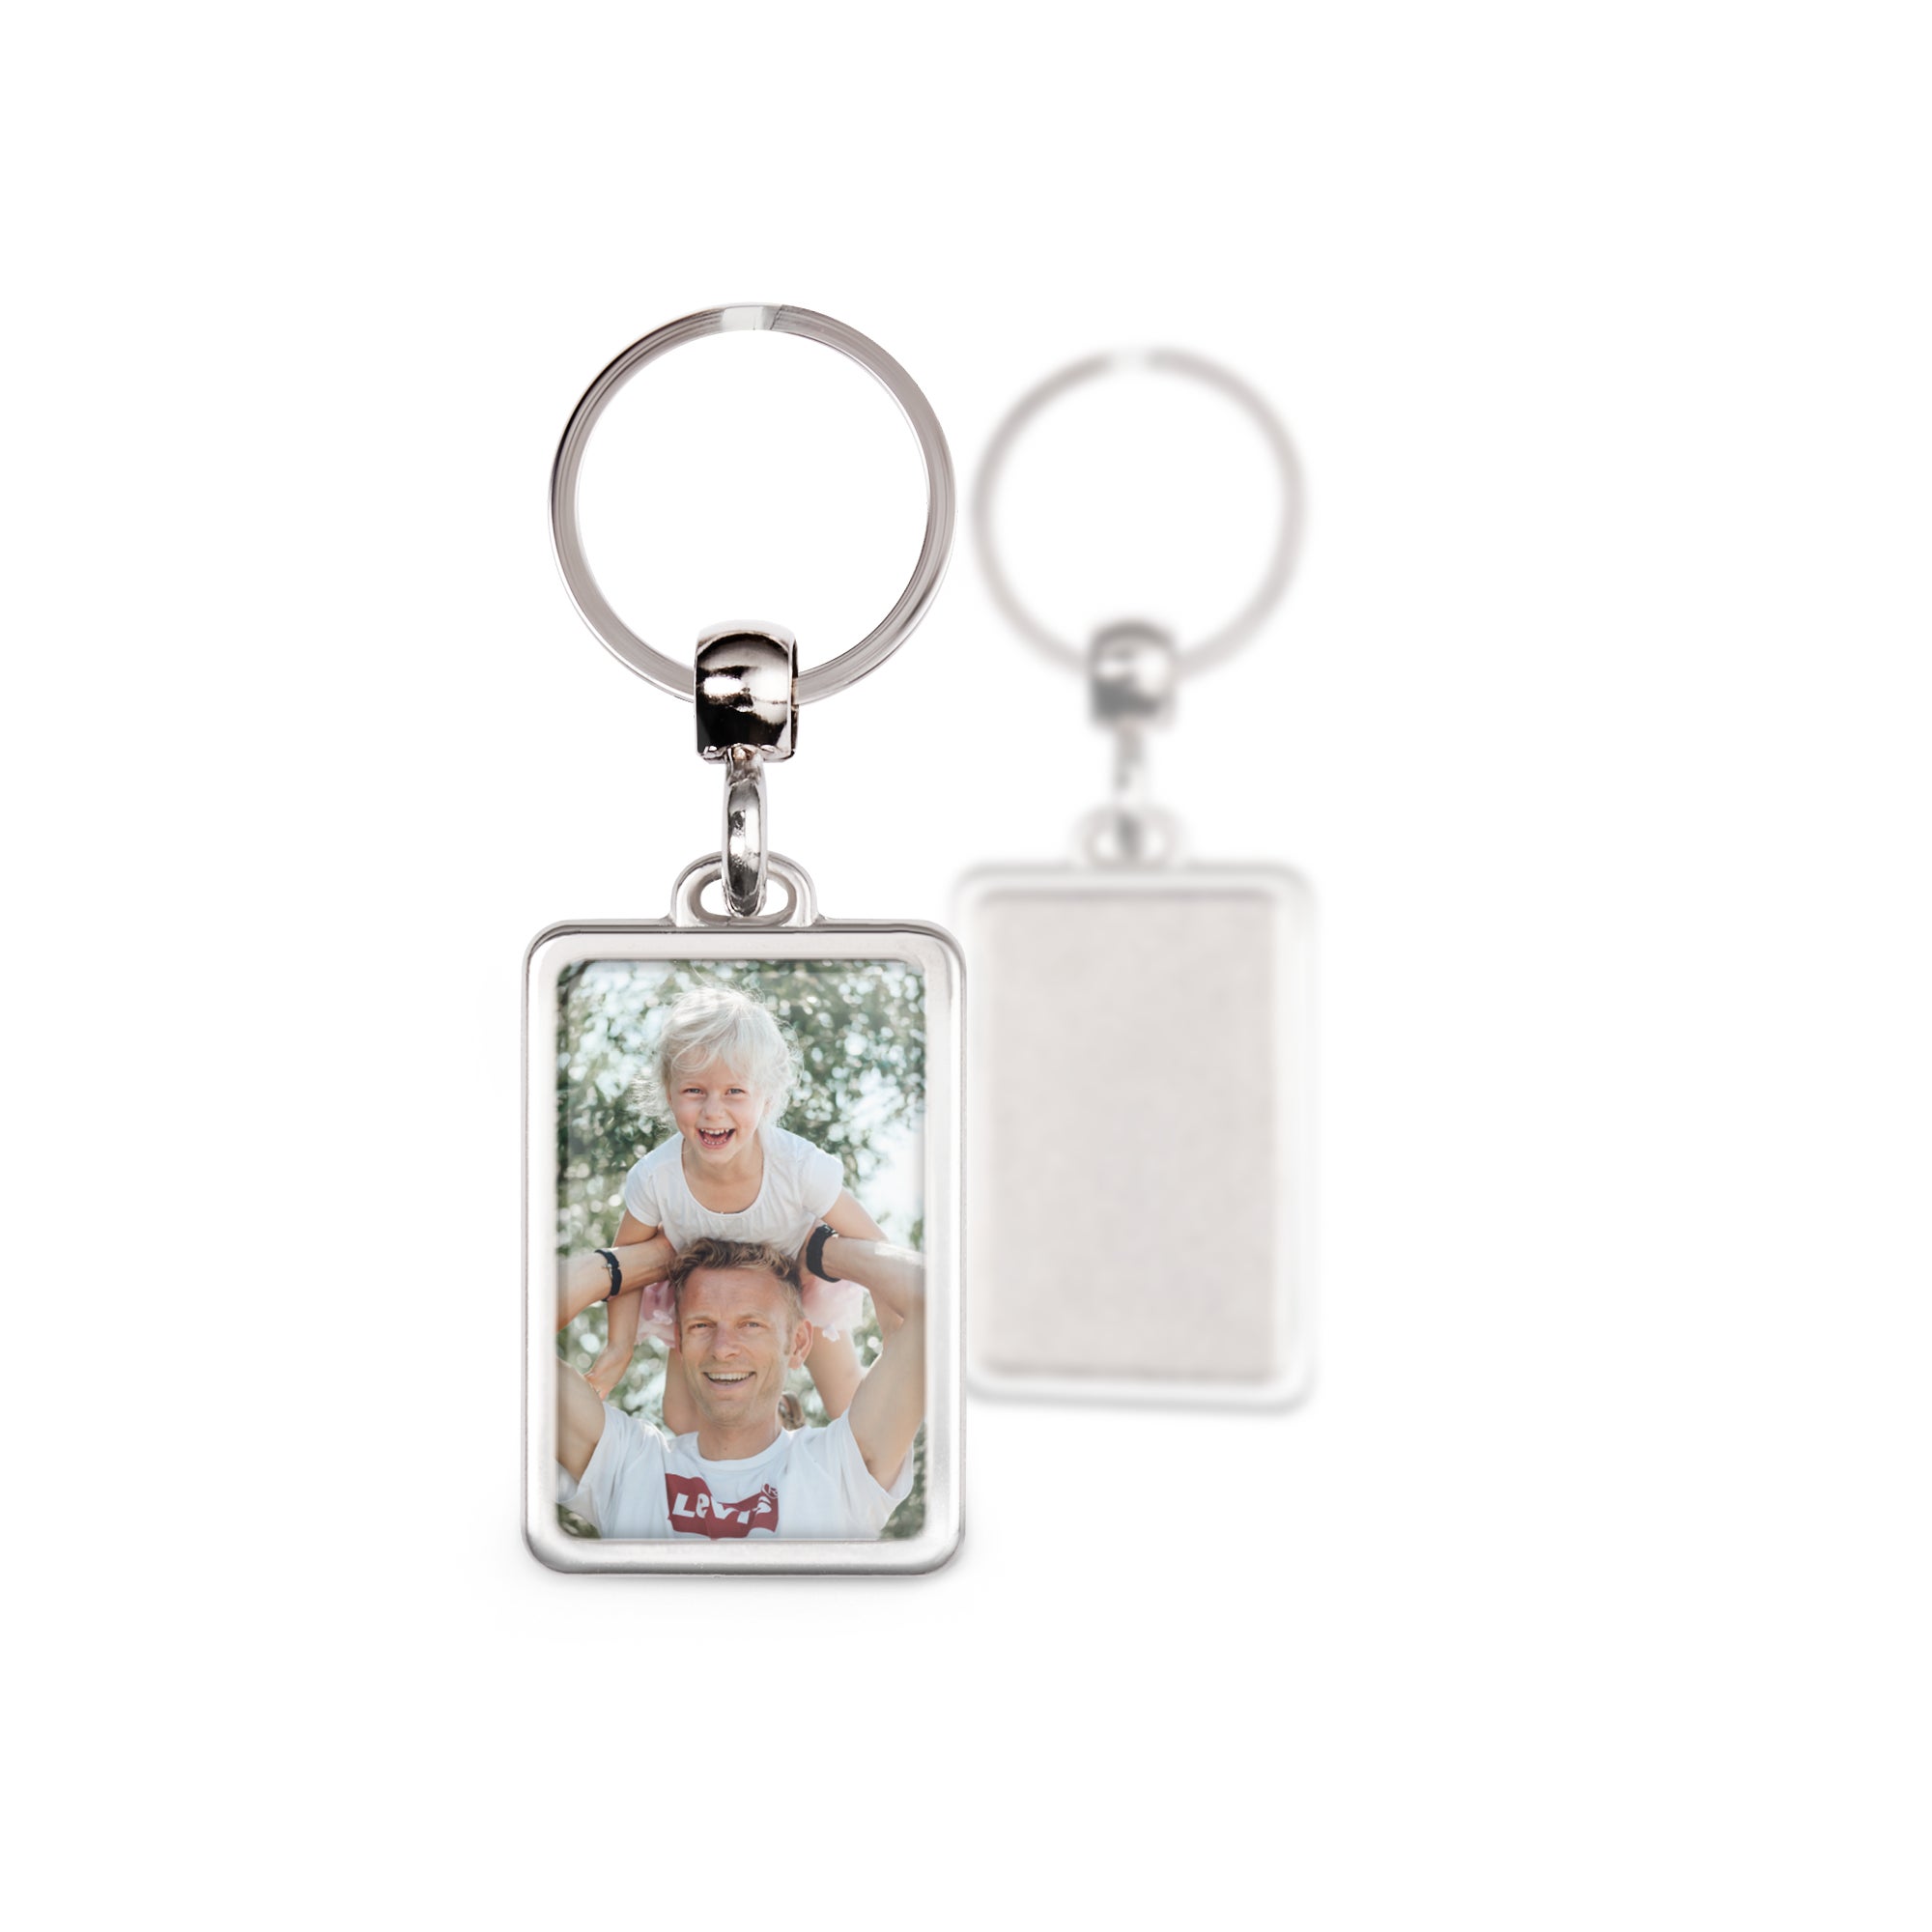 Personalised key ring - Father's Day - Rectangular - Stainless steel